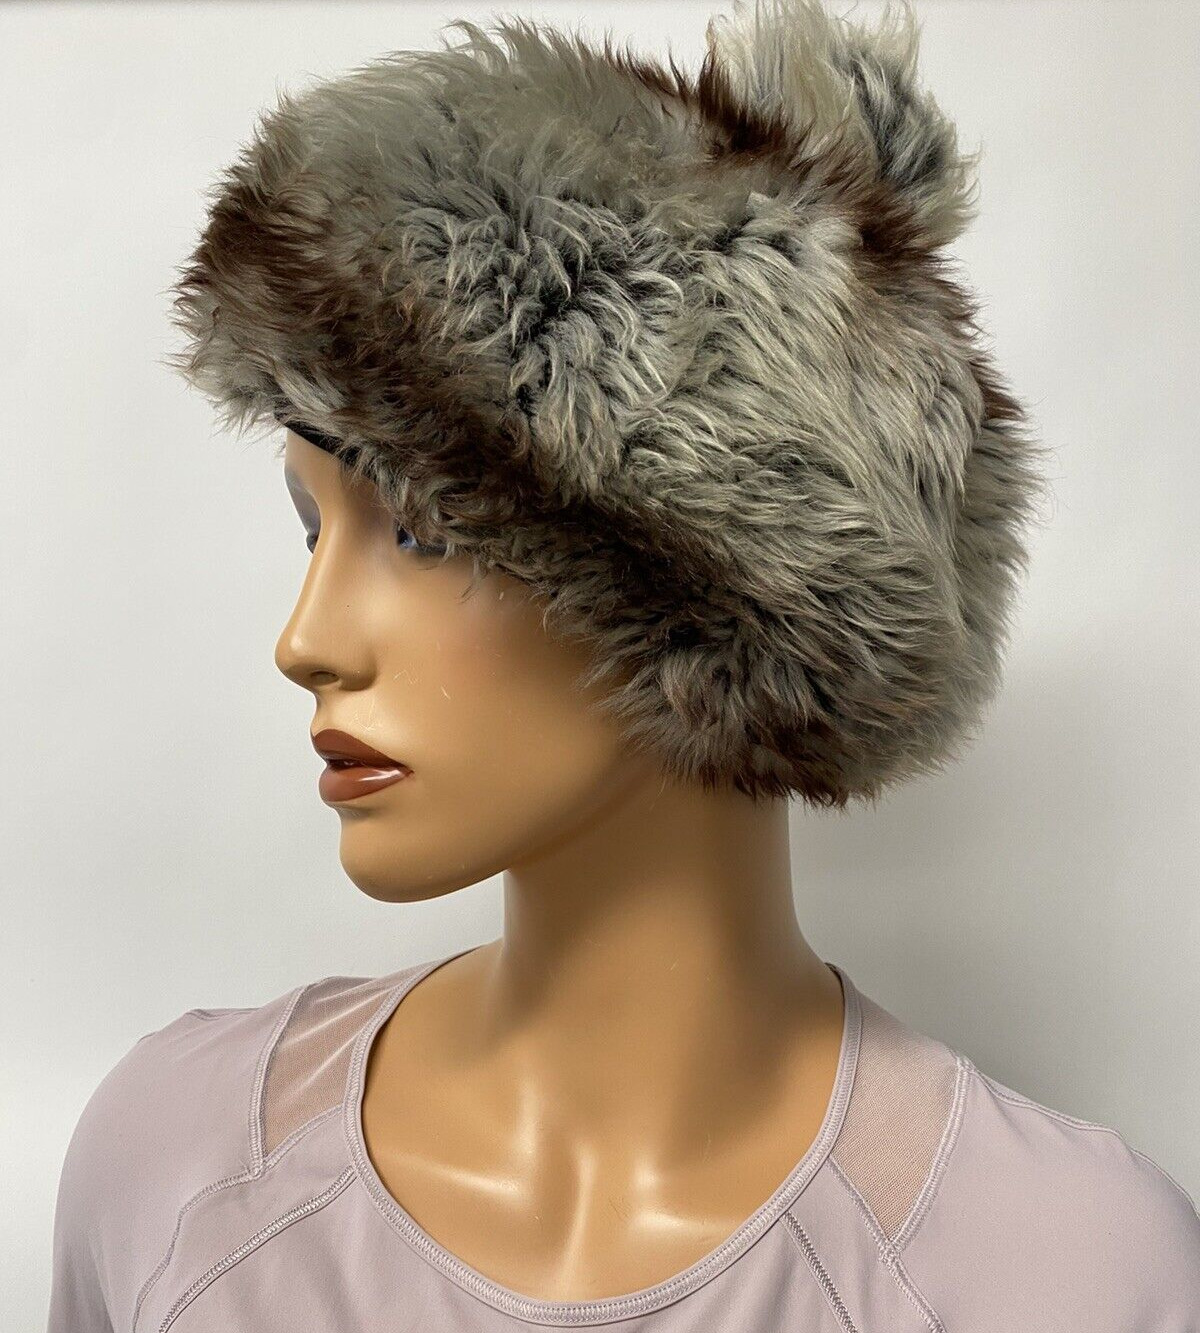 Dyed Tuscan Lamb made in Italy fur hat - image 3